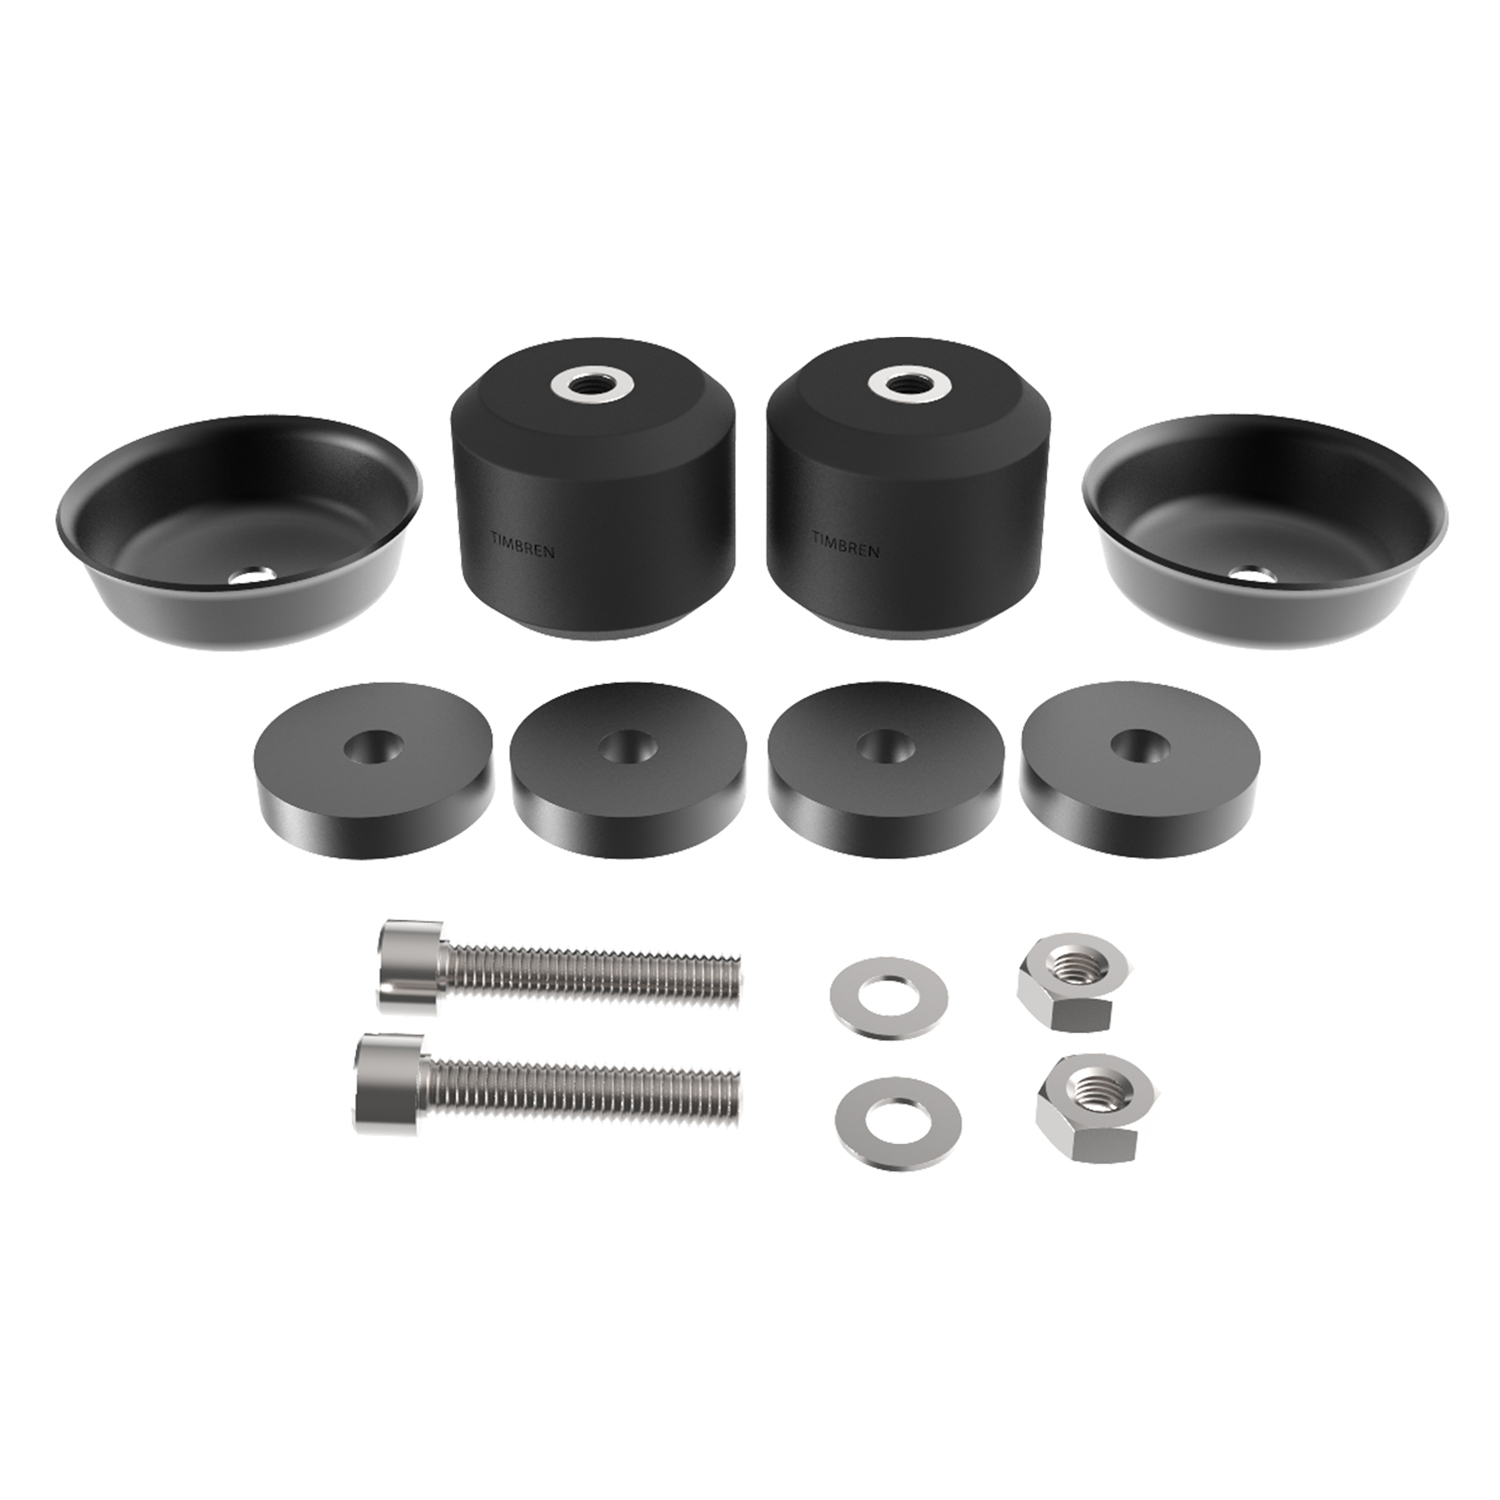 Active Off-Road Bumpstops for Chevy Colorado & GMC Canyon - Front Kit